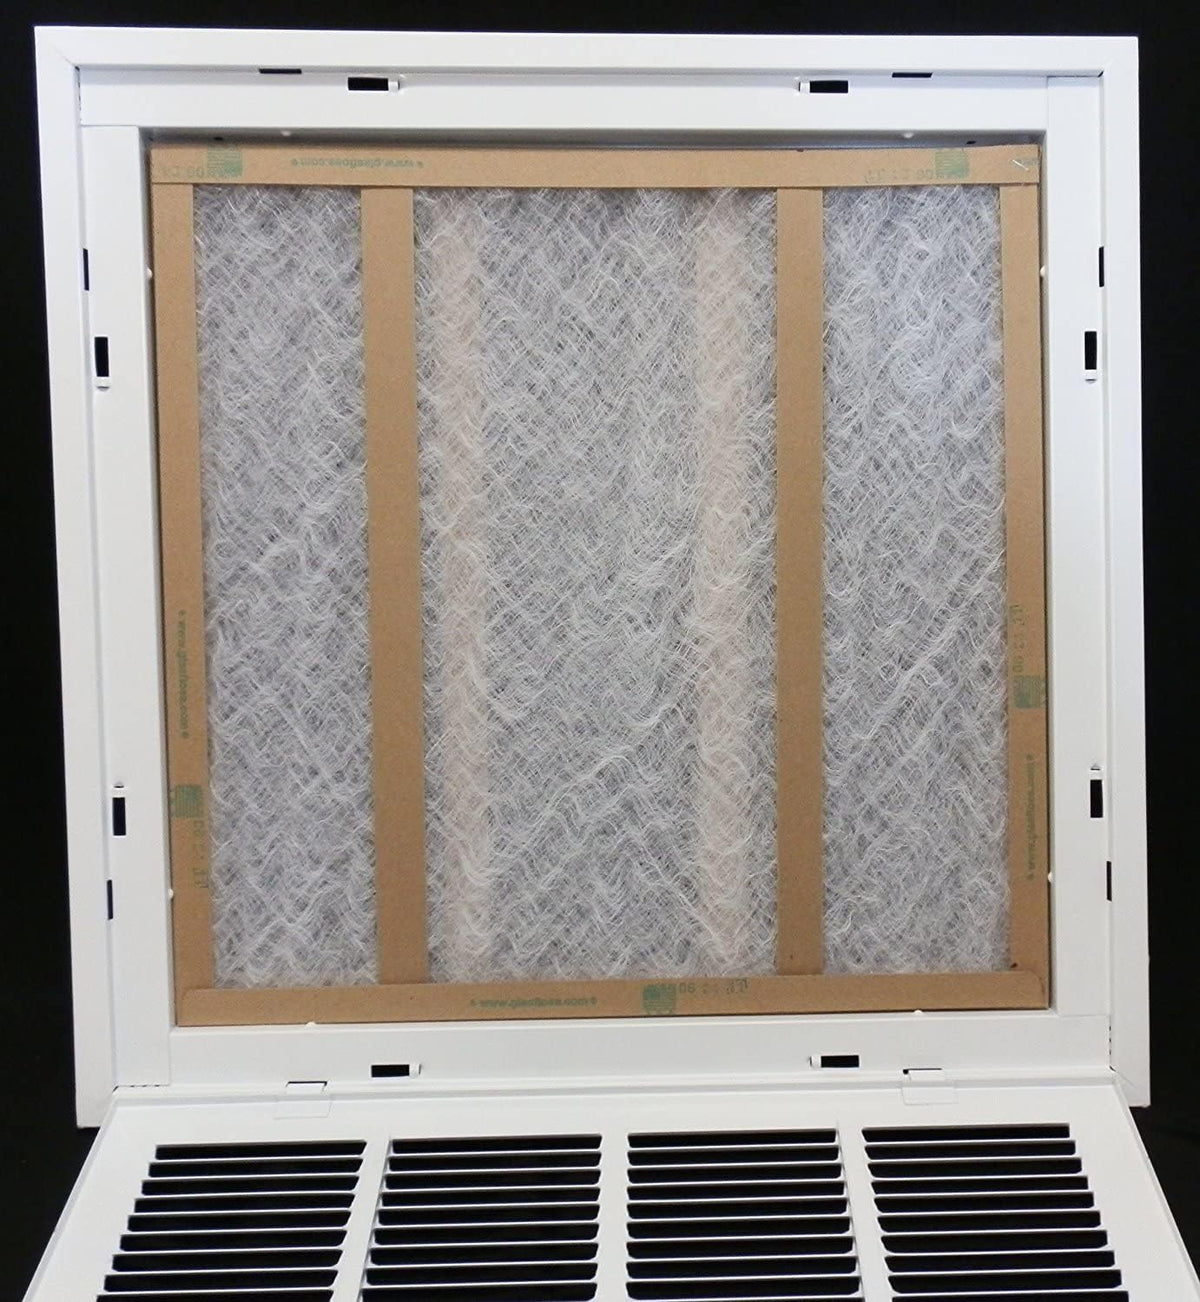 24&quot; x 24&quot; RETURN FILTER GRILLE for Drop Ceiling - Uses 20&quot; x 20&quot; Filter - Easy Access Door &amp; Latch To Filter